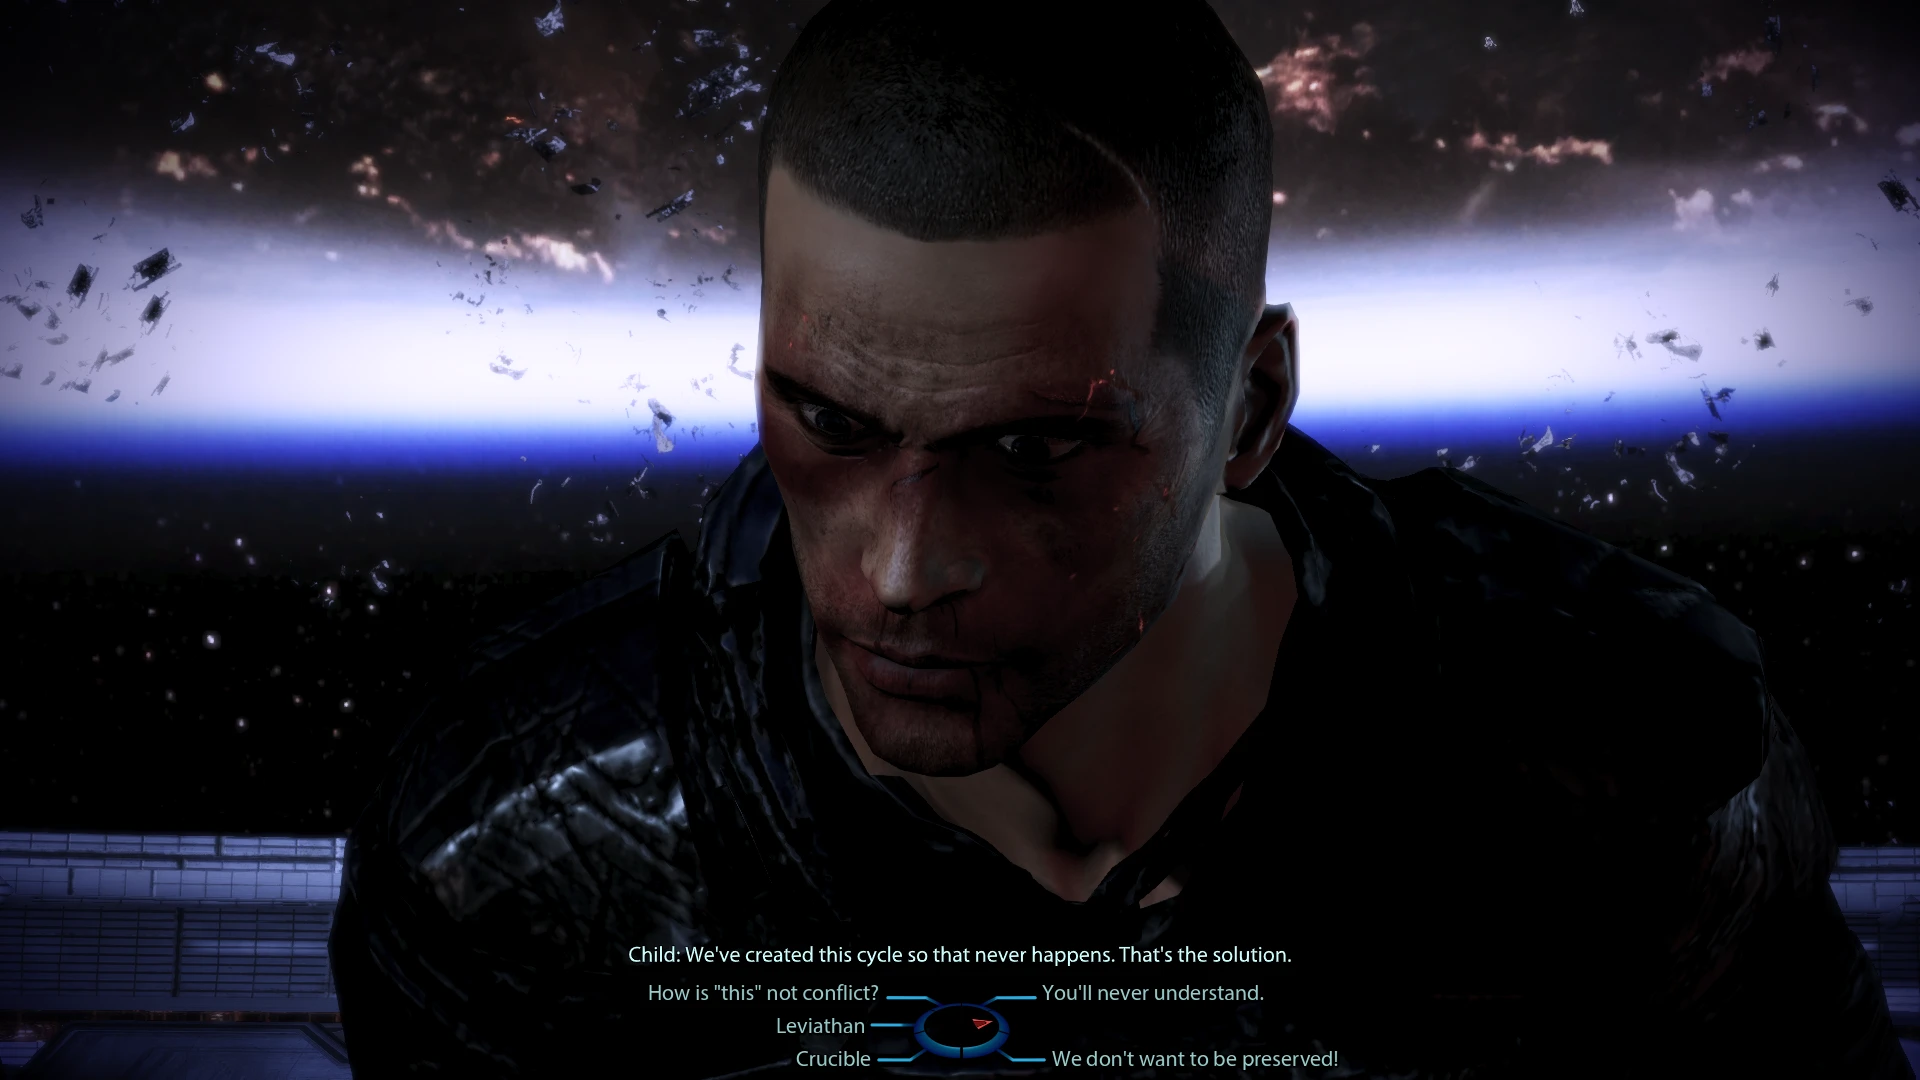 mass effect indoctrination theory 2019